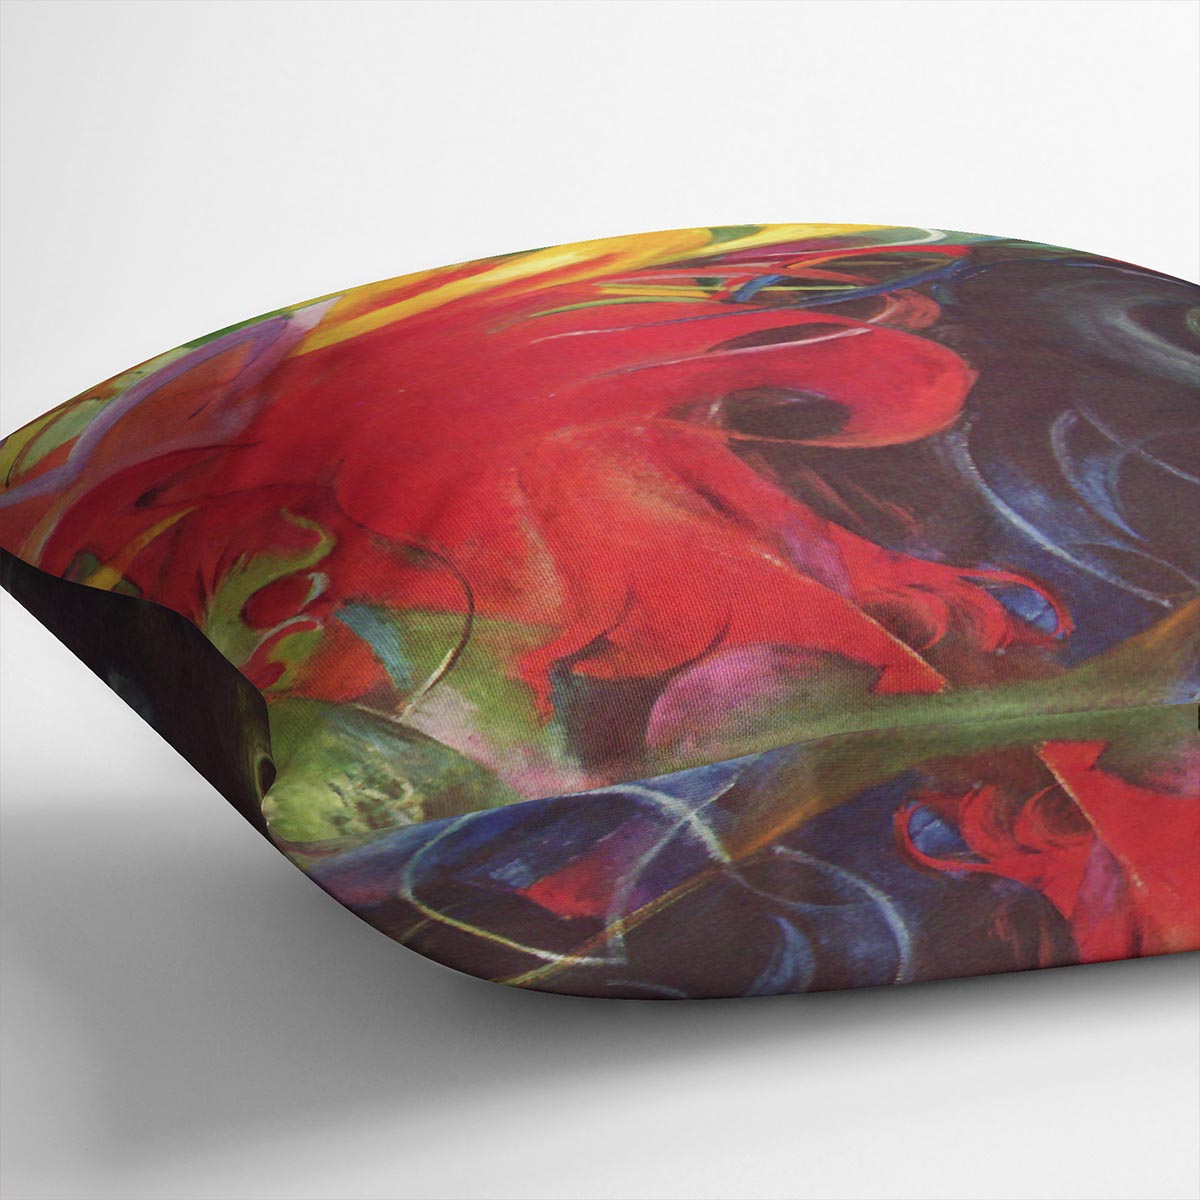 Fighting forms by Franz Marc Cushion